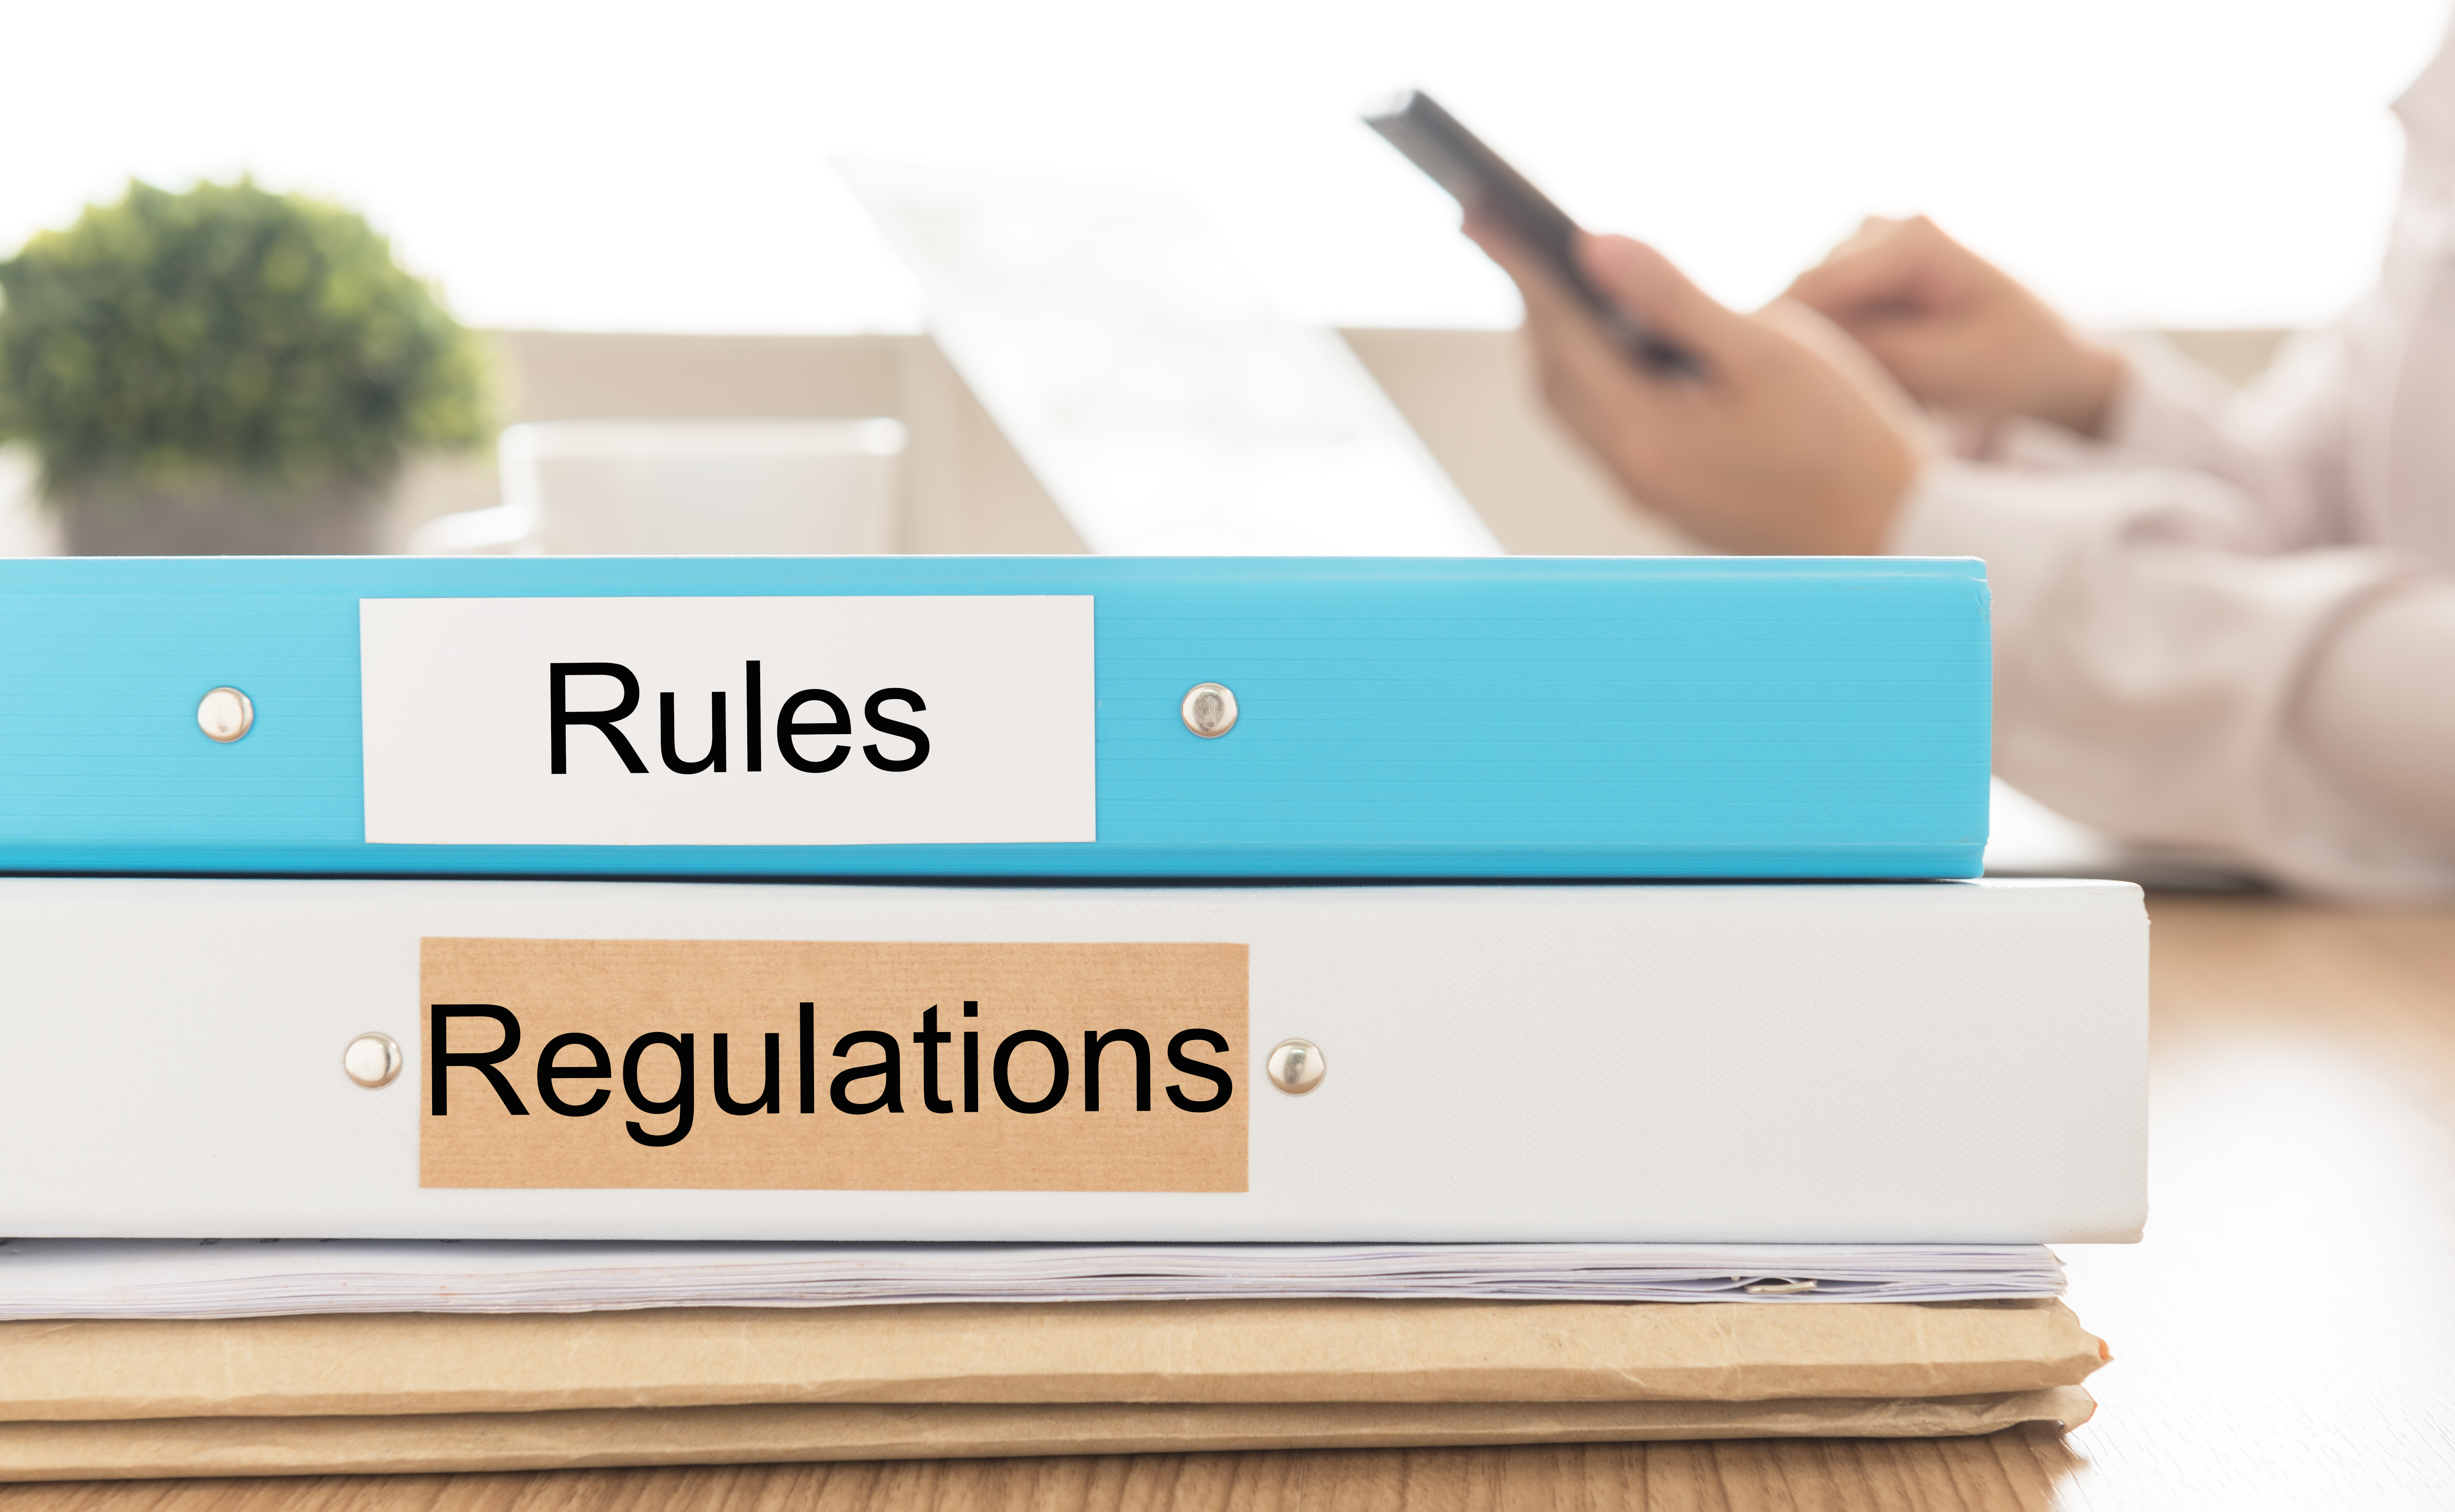 Binder labeled Rules and another labeled Regulations